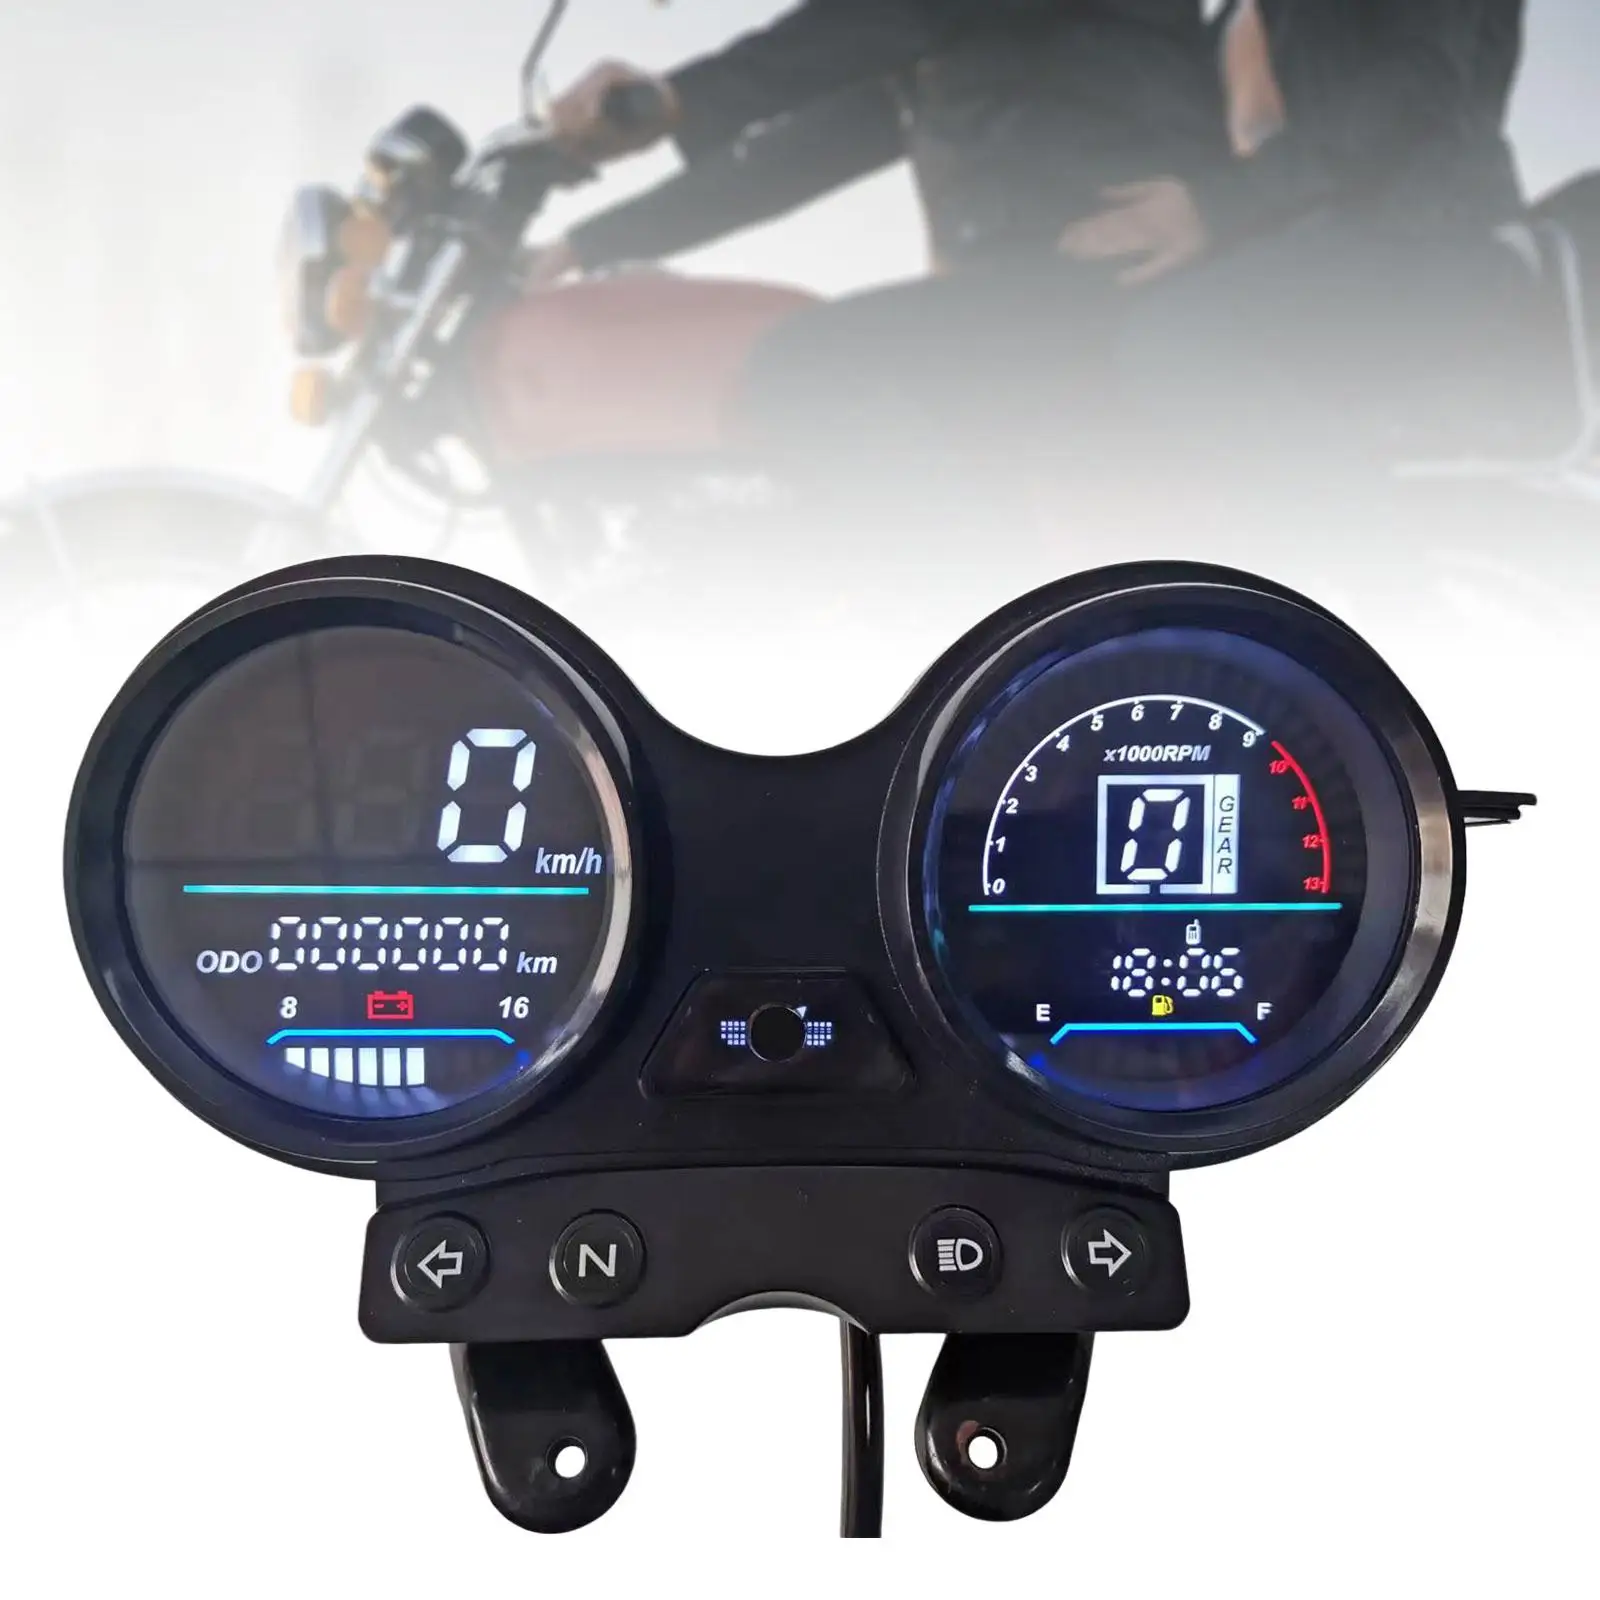 DC 12V Motorcycle Odometer Speedometer for Ybr 125 Replaces Spare Parts